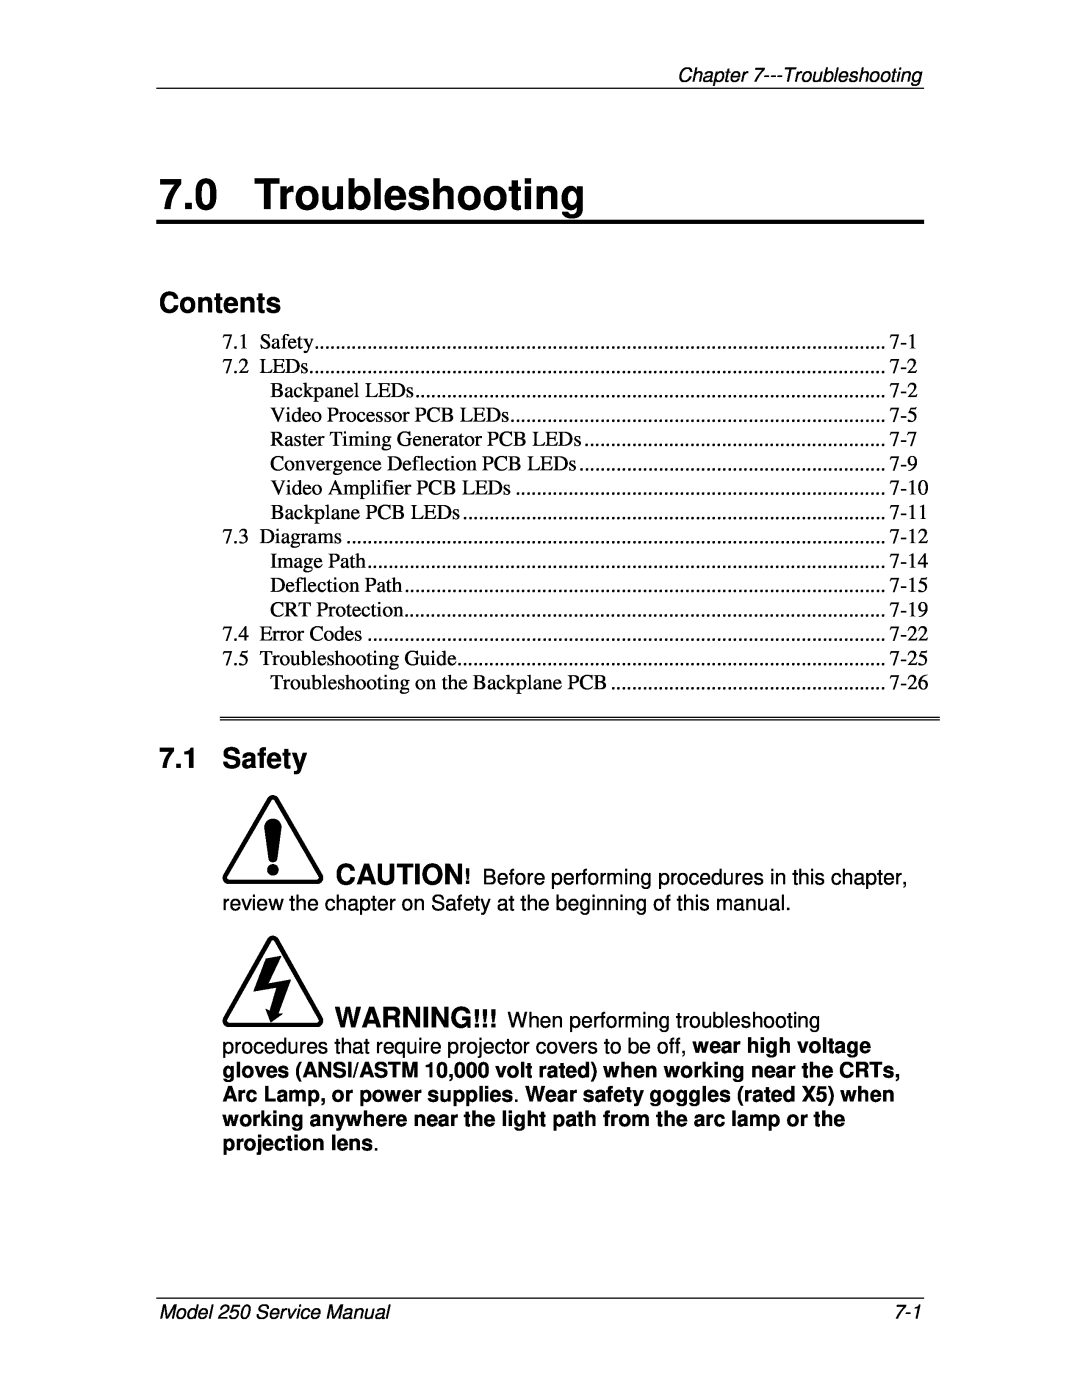 JVC 250 service manual Troubleshooting, Safety, Contents 